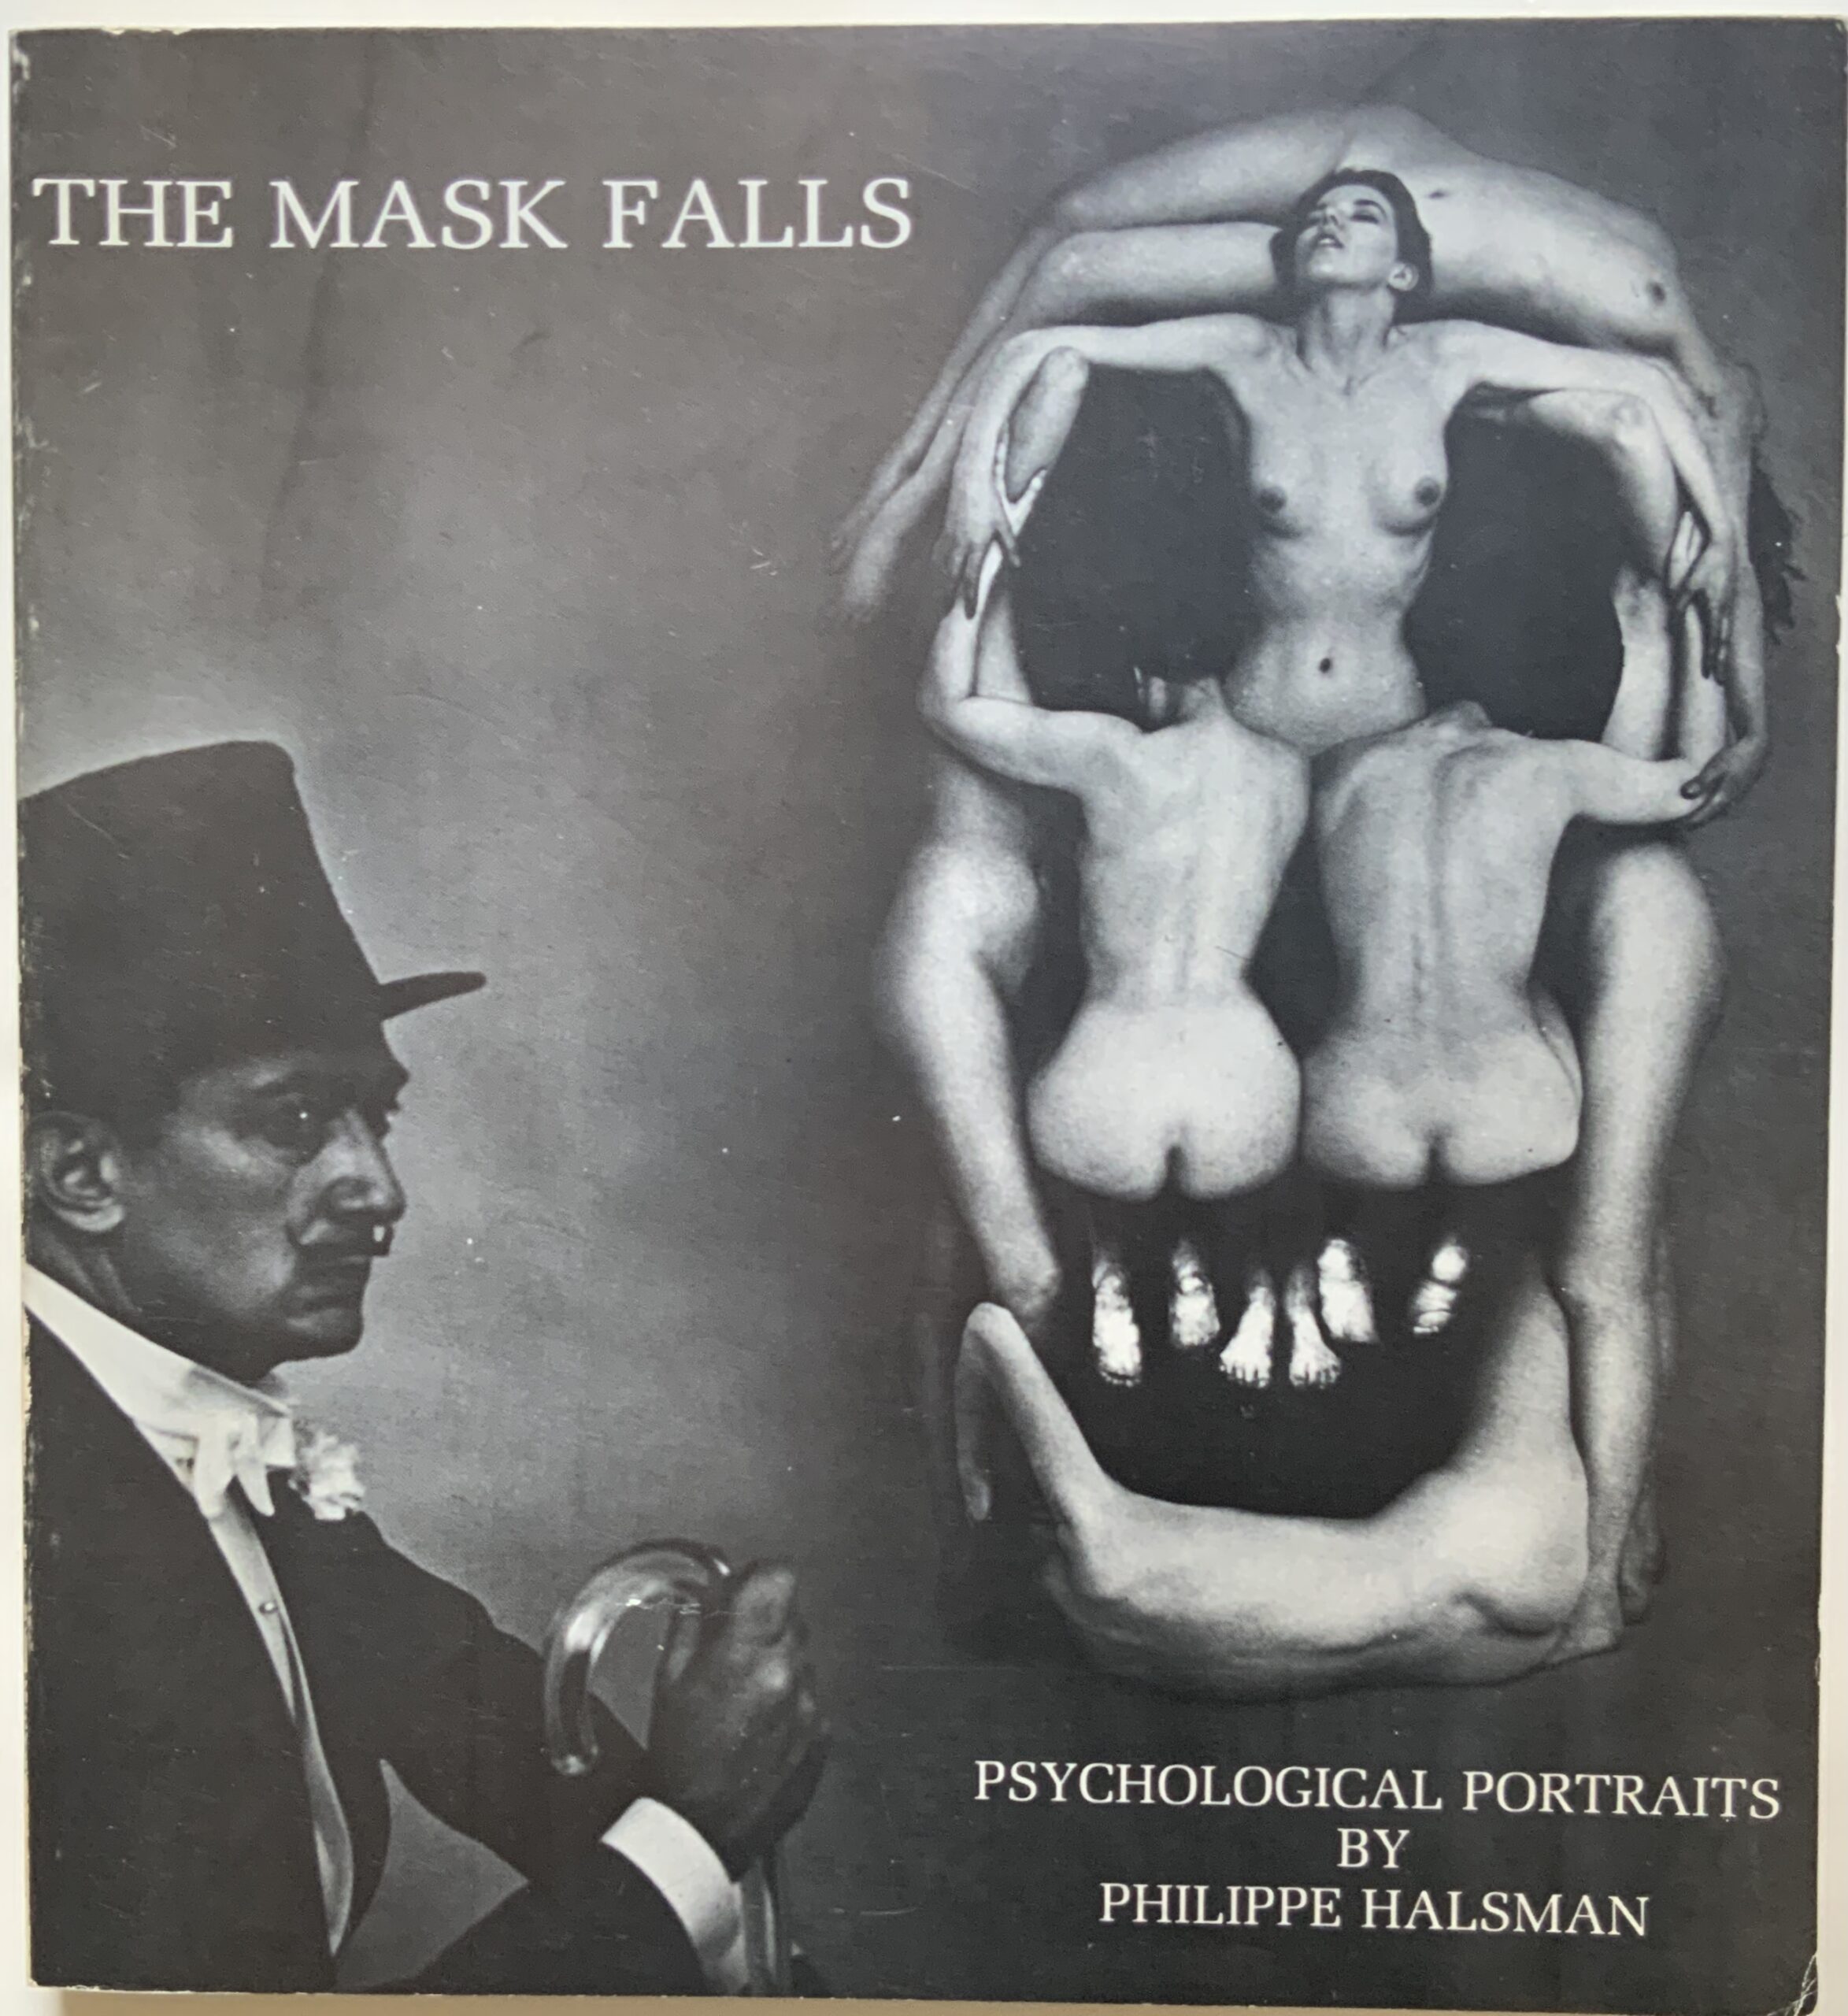 M104	THE MASK FALLS - PSYCHOLOGICAL PORTRAITS BY PHILIPPE HALSMAN